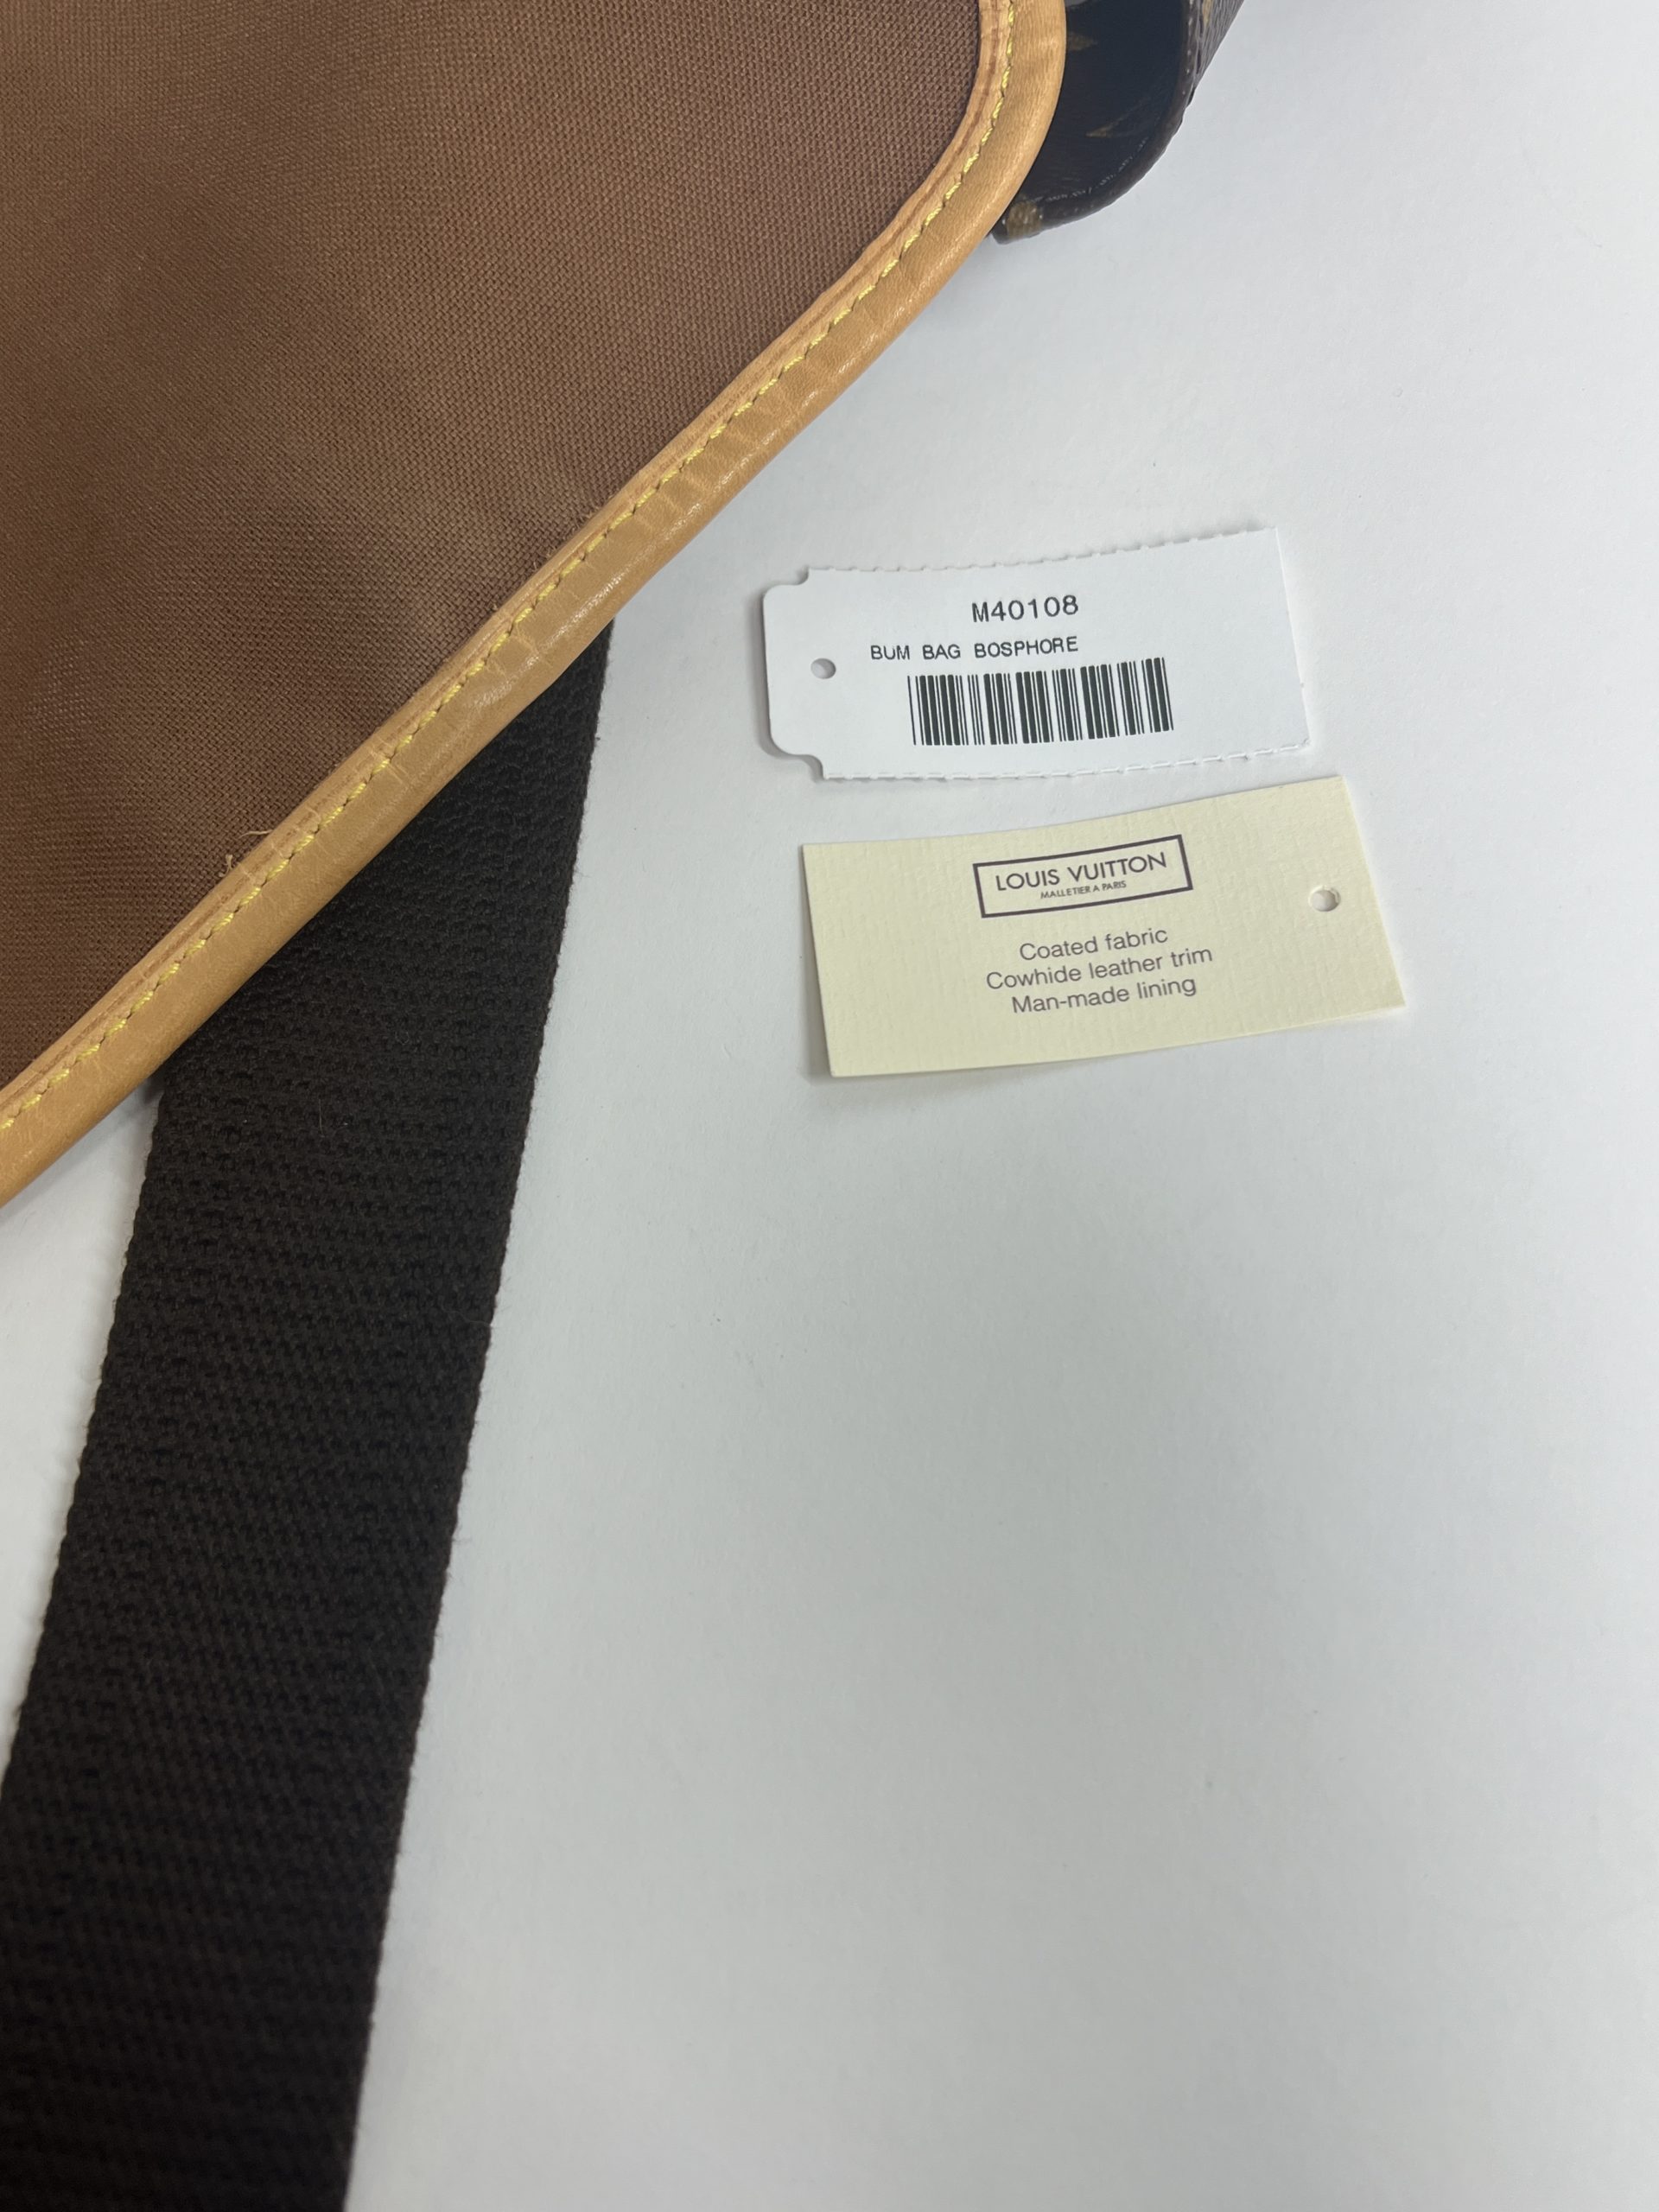 Louis Vuitton Coated Fabric Cowhide Leather Trim Man-made Lining